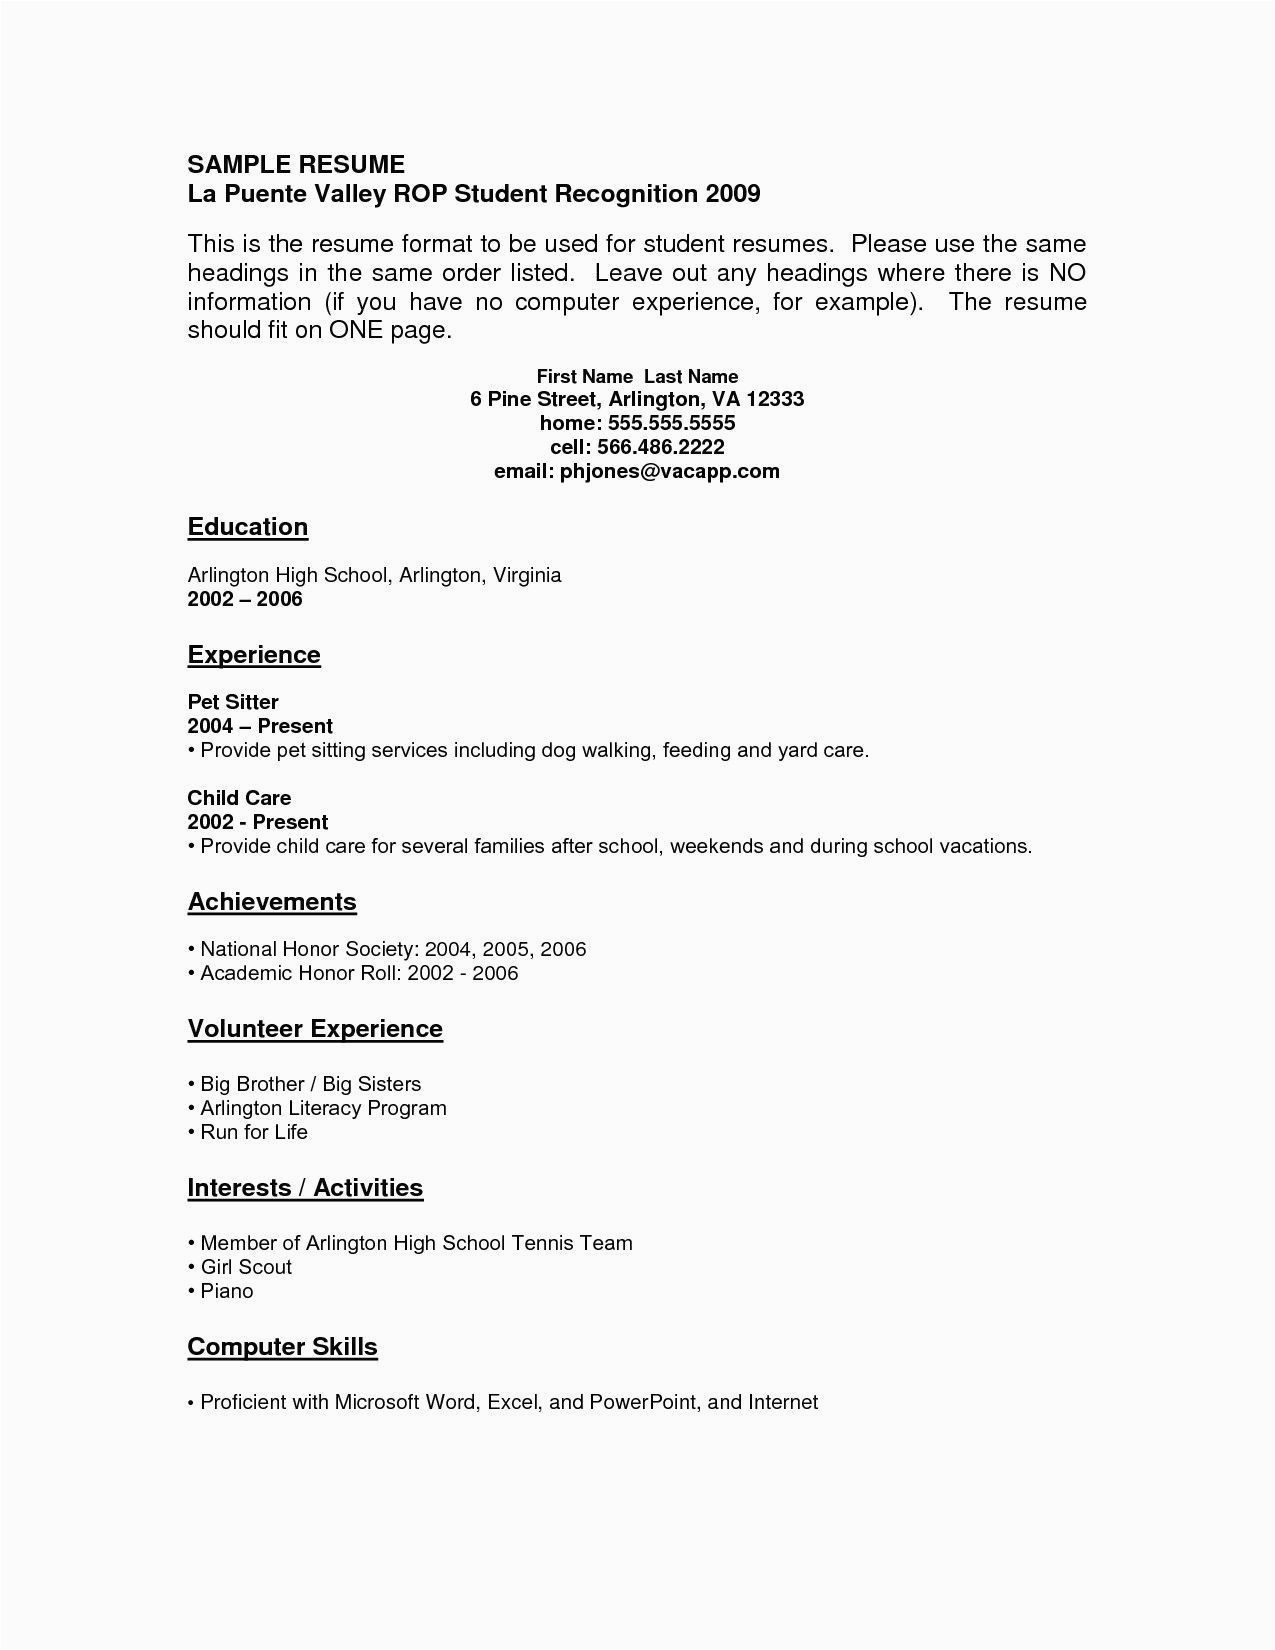 Free Resume Template for Teenager with No Experience No Work Experience Resume New Resume for Teenager with No